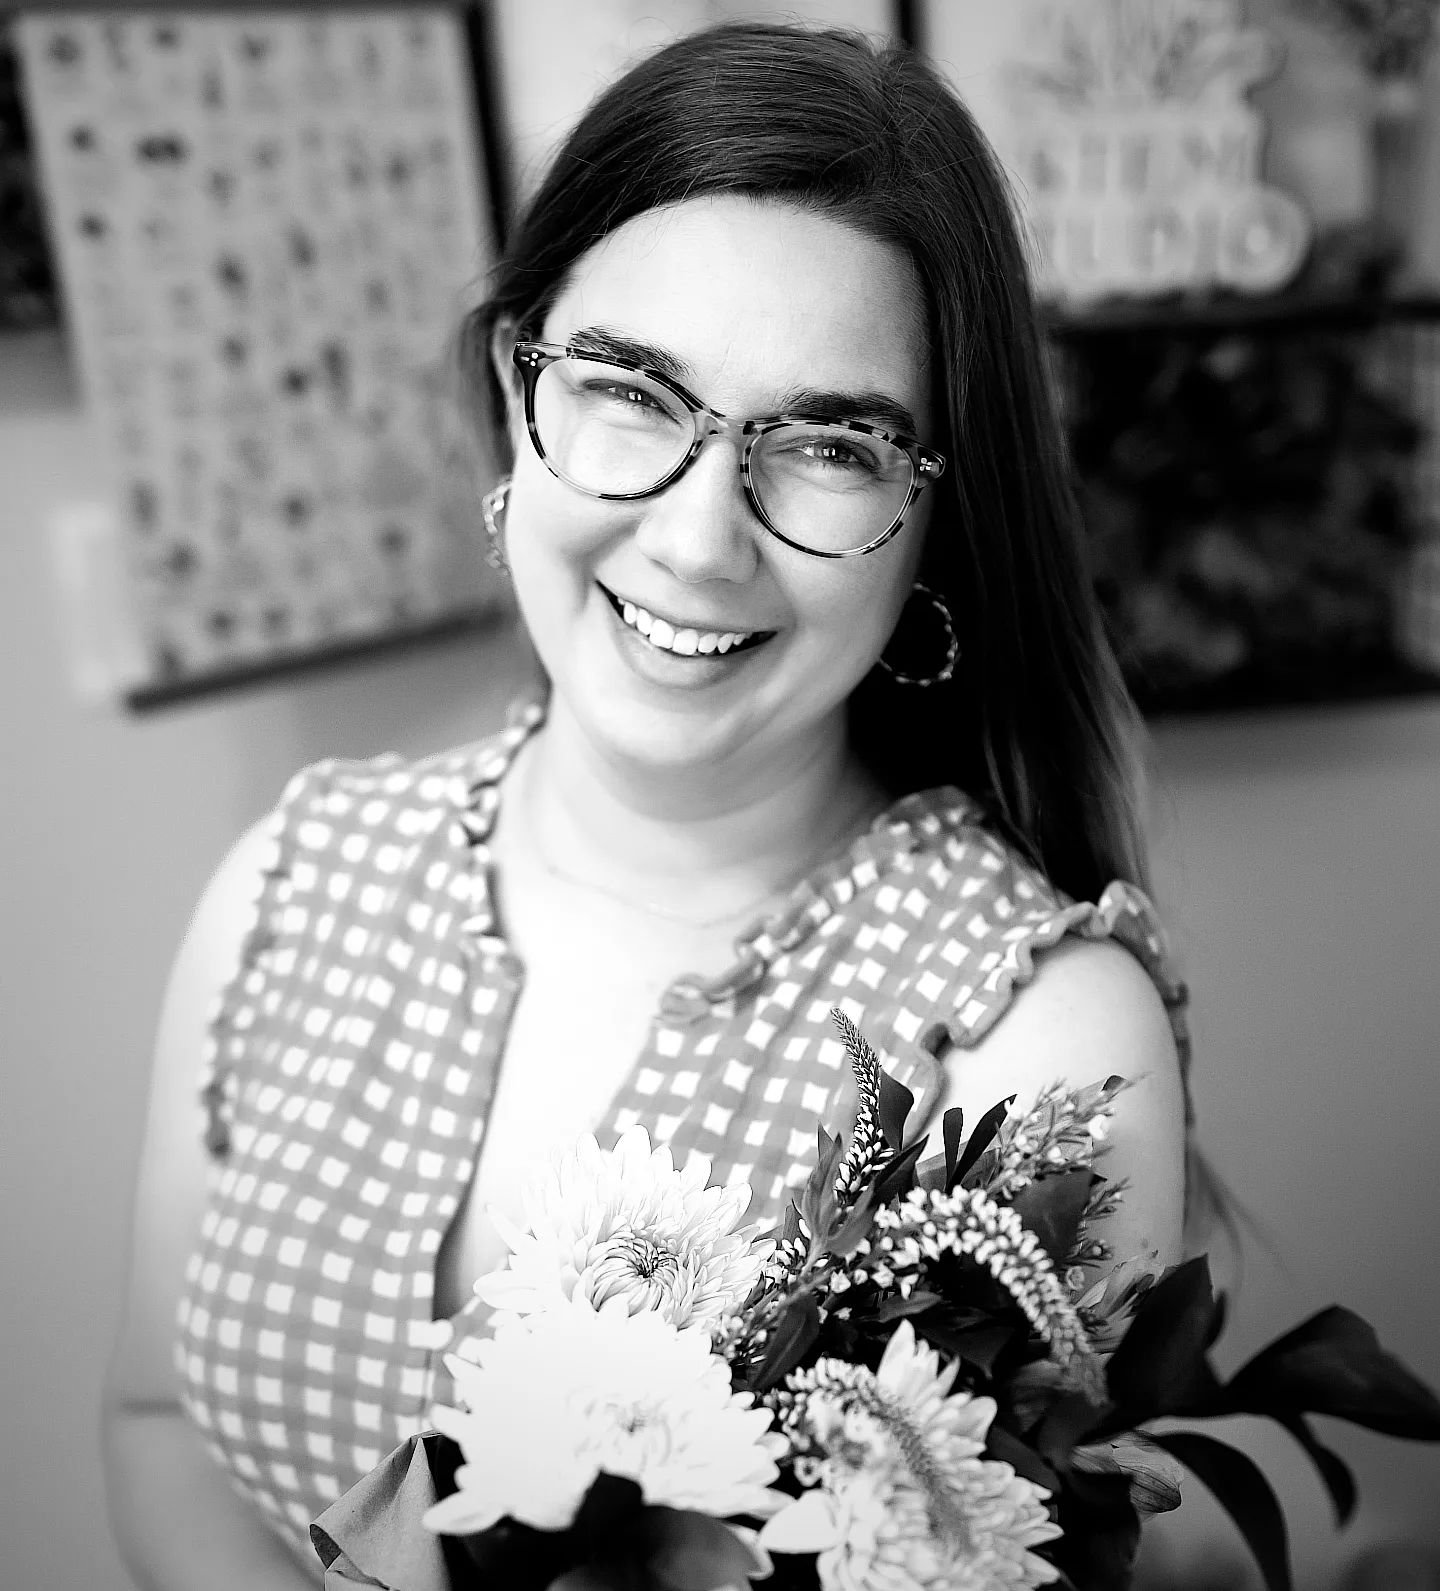 Howdy! 👋 My name is Mattie and I'm the creator behind Stem Studio. I started this business to provide unique floral experiences in the Houston area, and I'm excited to share the hope and joy I've found in flowers with all of you. Thank you for joini